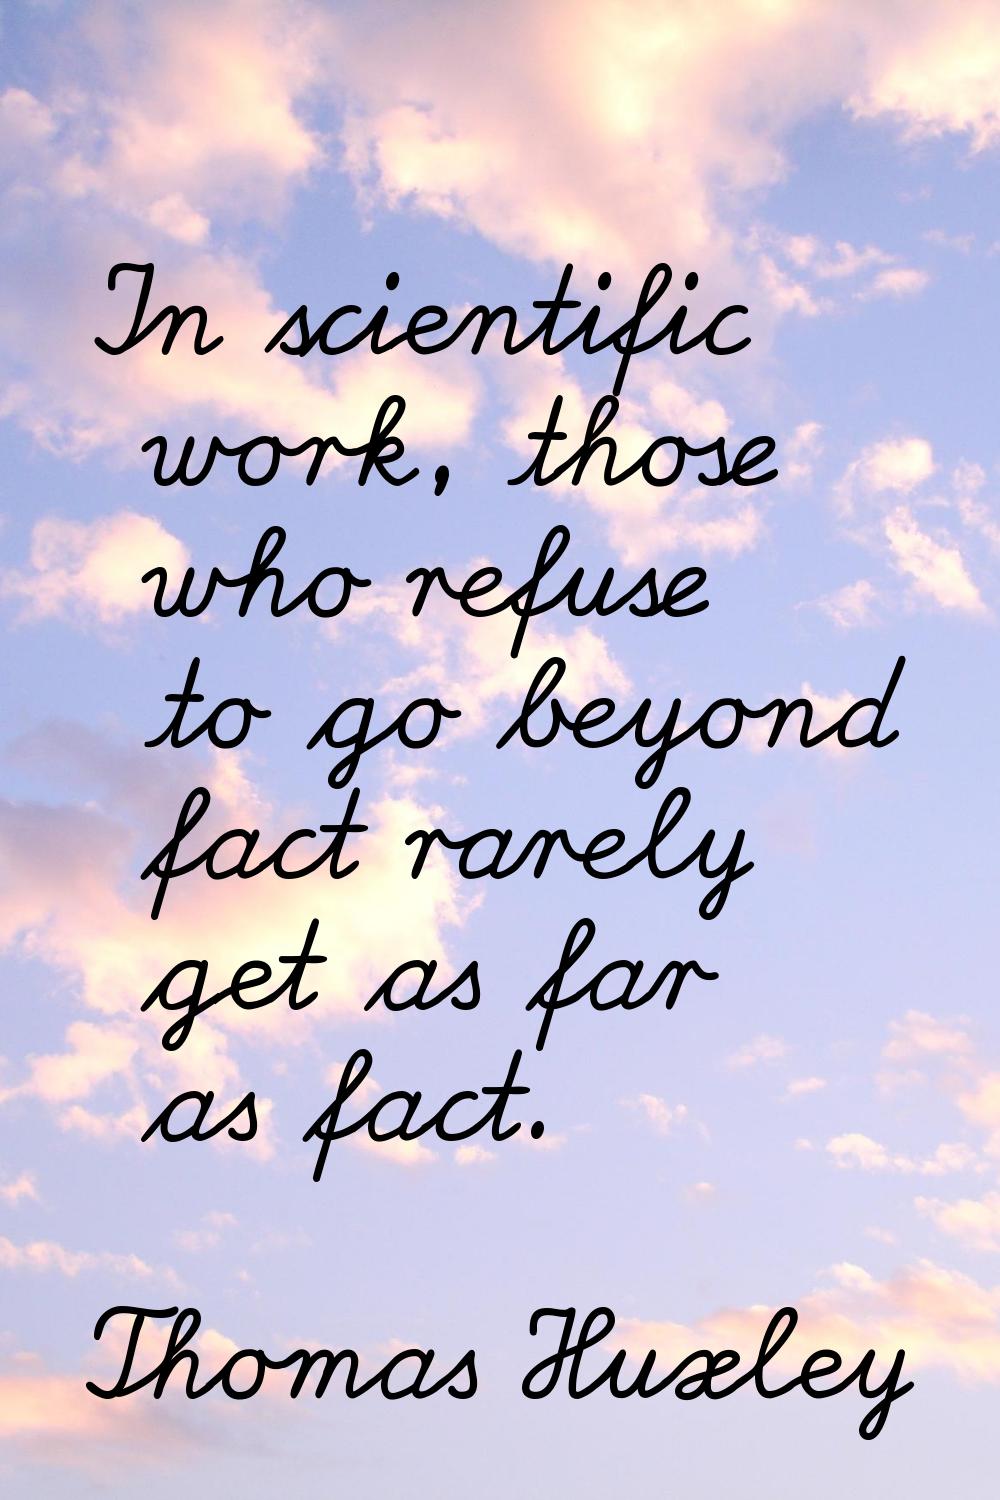 In scientific work, those who refuse to go beyond fact rarely get as far as fact.